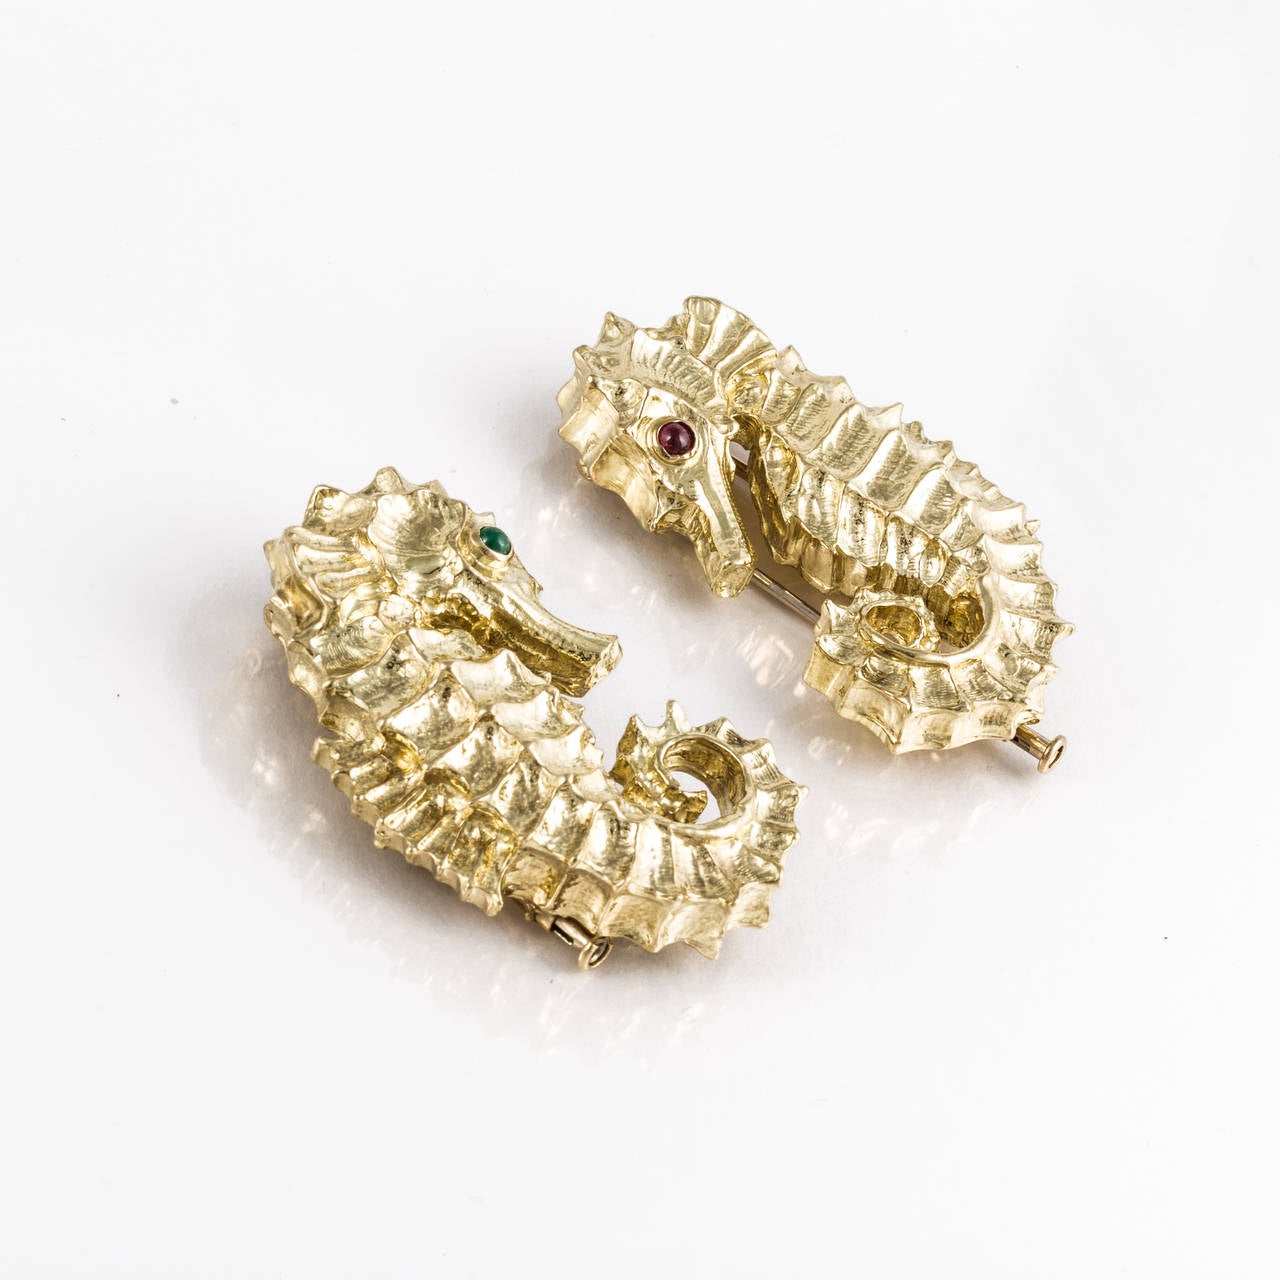 David Webb pair of seahorse brooches in 18K yellow gold marked 